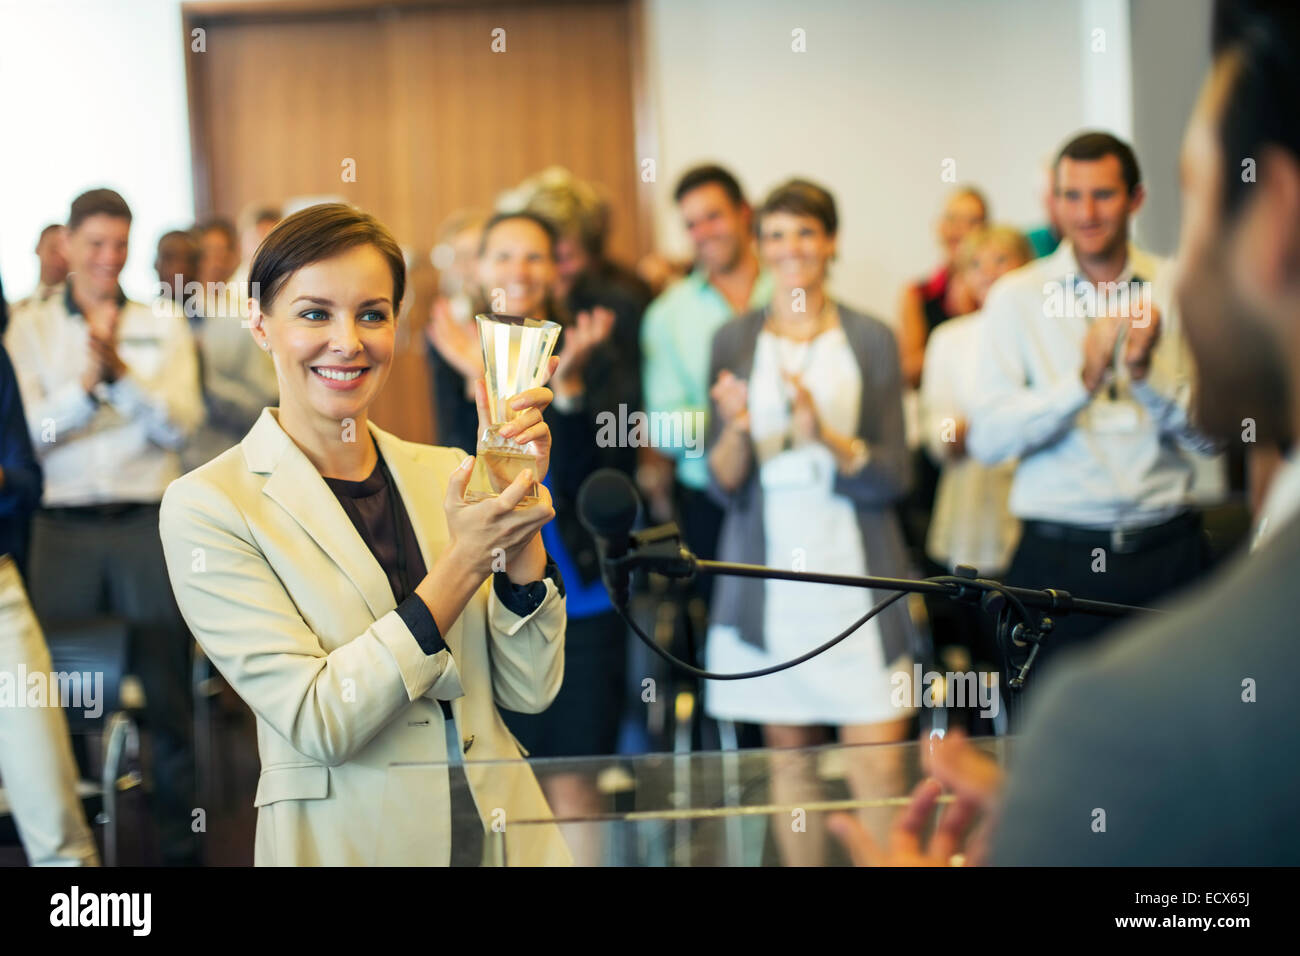 Businesswoman giving award to businessman, colleagues in background Stock Photo